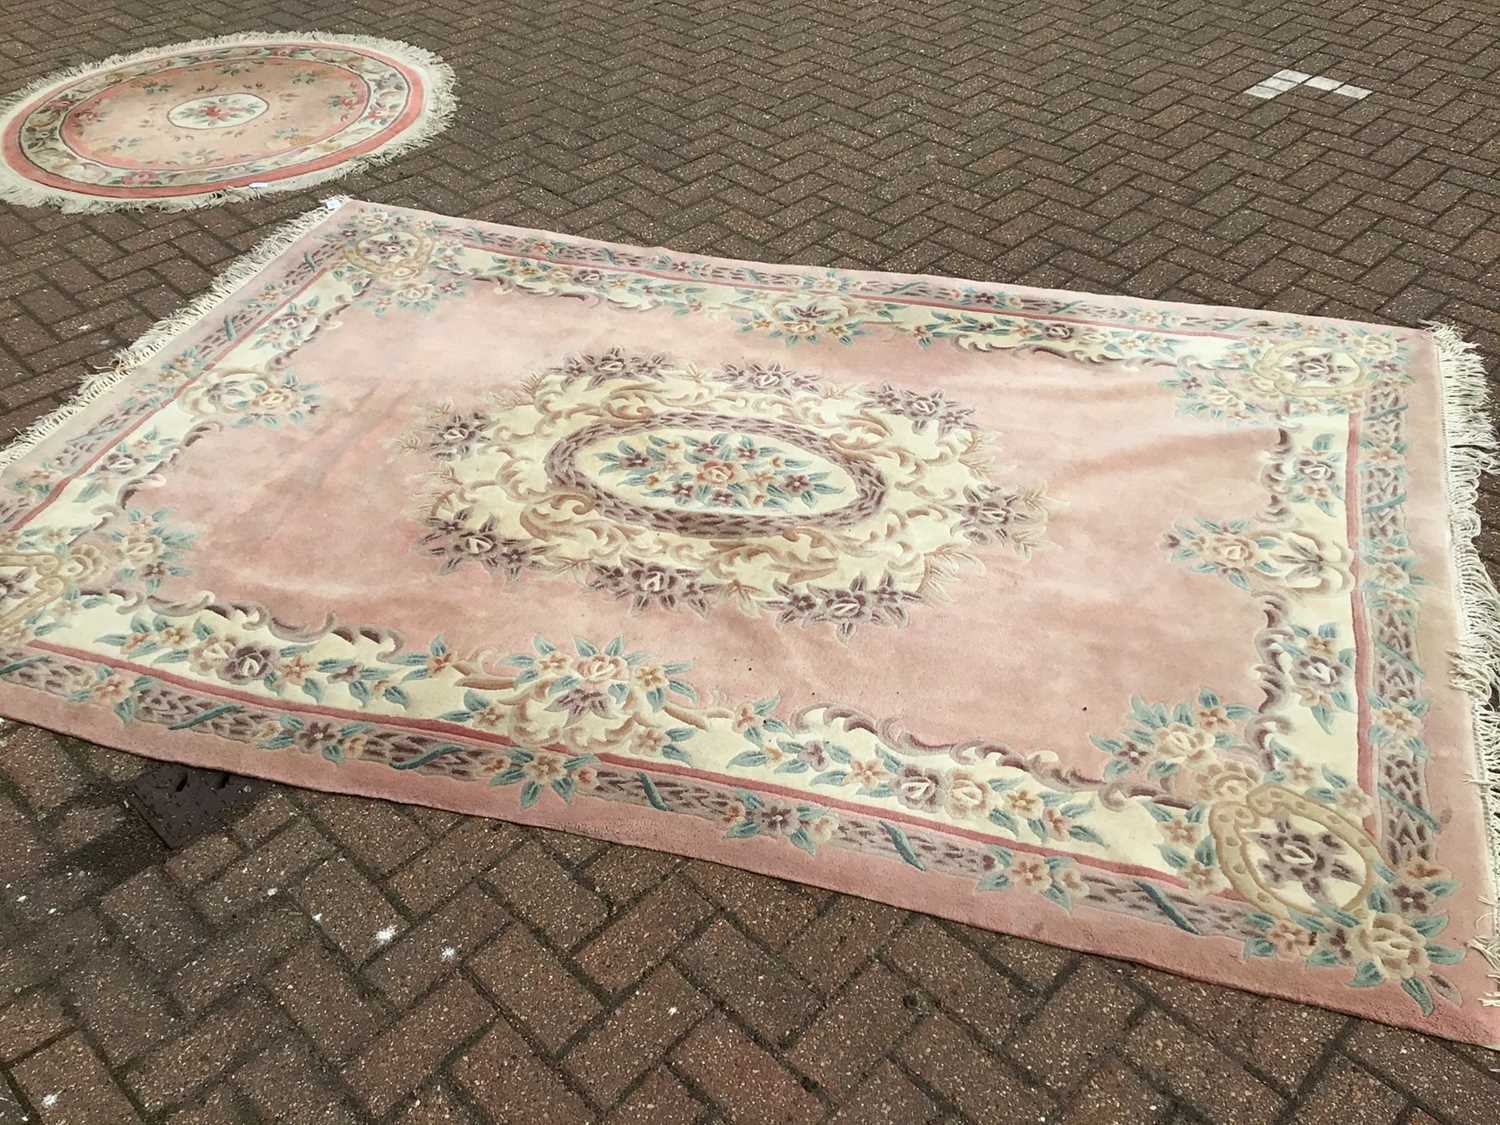 Lot 66 - Chinese wash rug with floral decoration on peach ground 274cm x 186cm with a smaller round rug of similar description 134cm